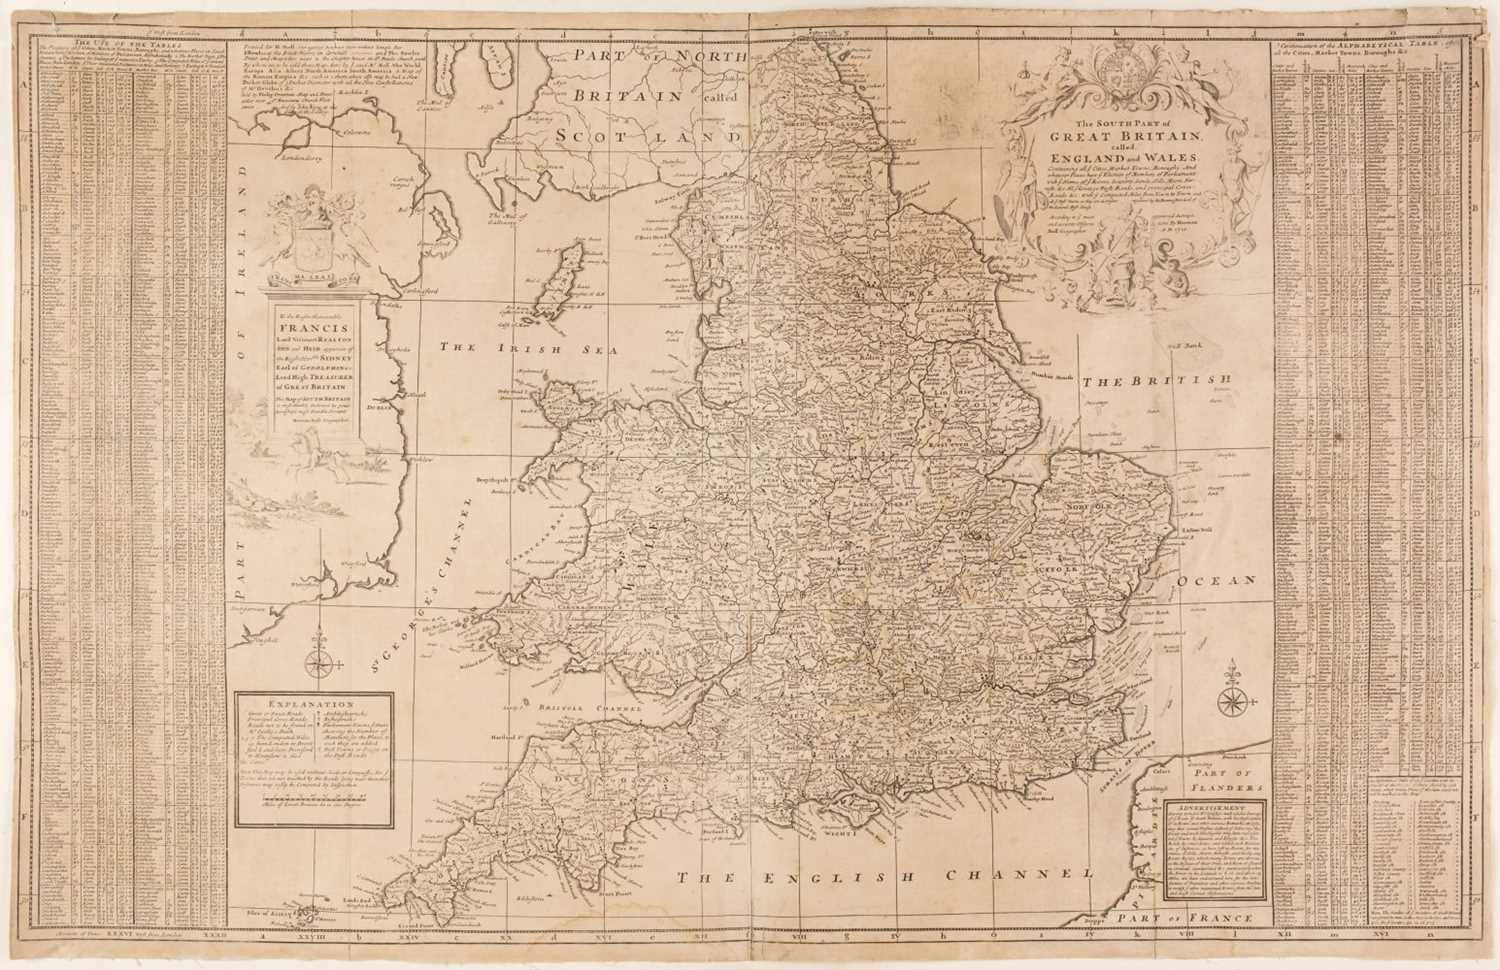 Lot 37 - Maps. A collection of approximately 135 British maps, mostly 18th & 19th century